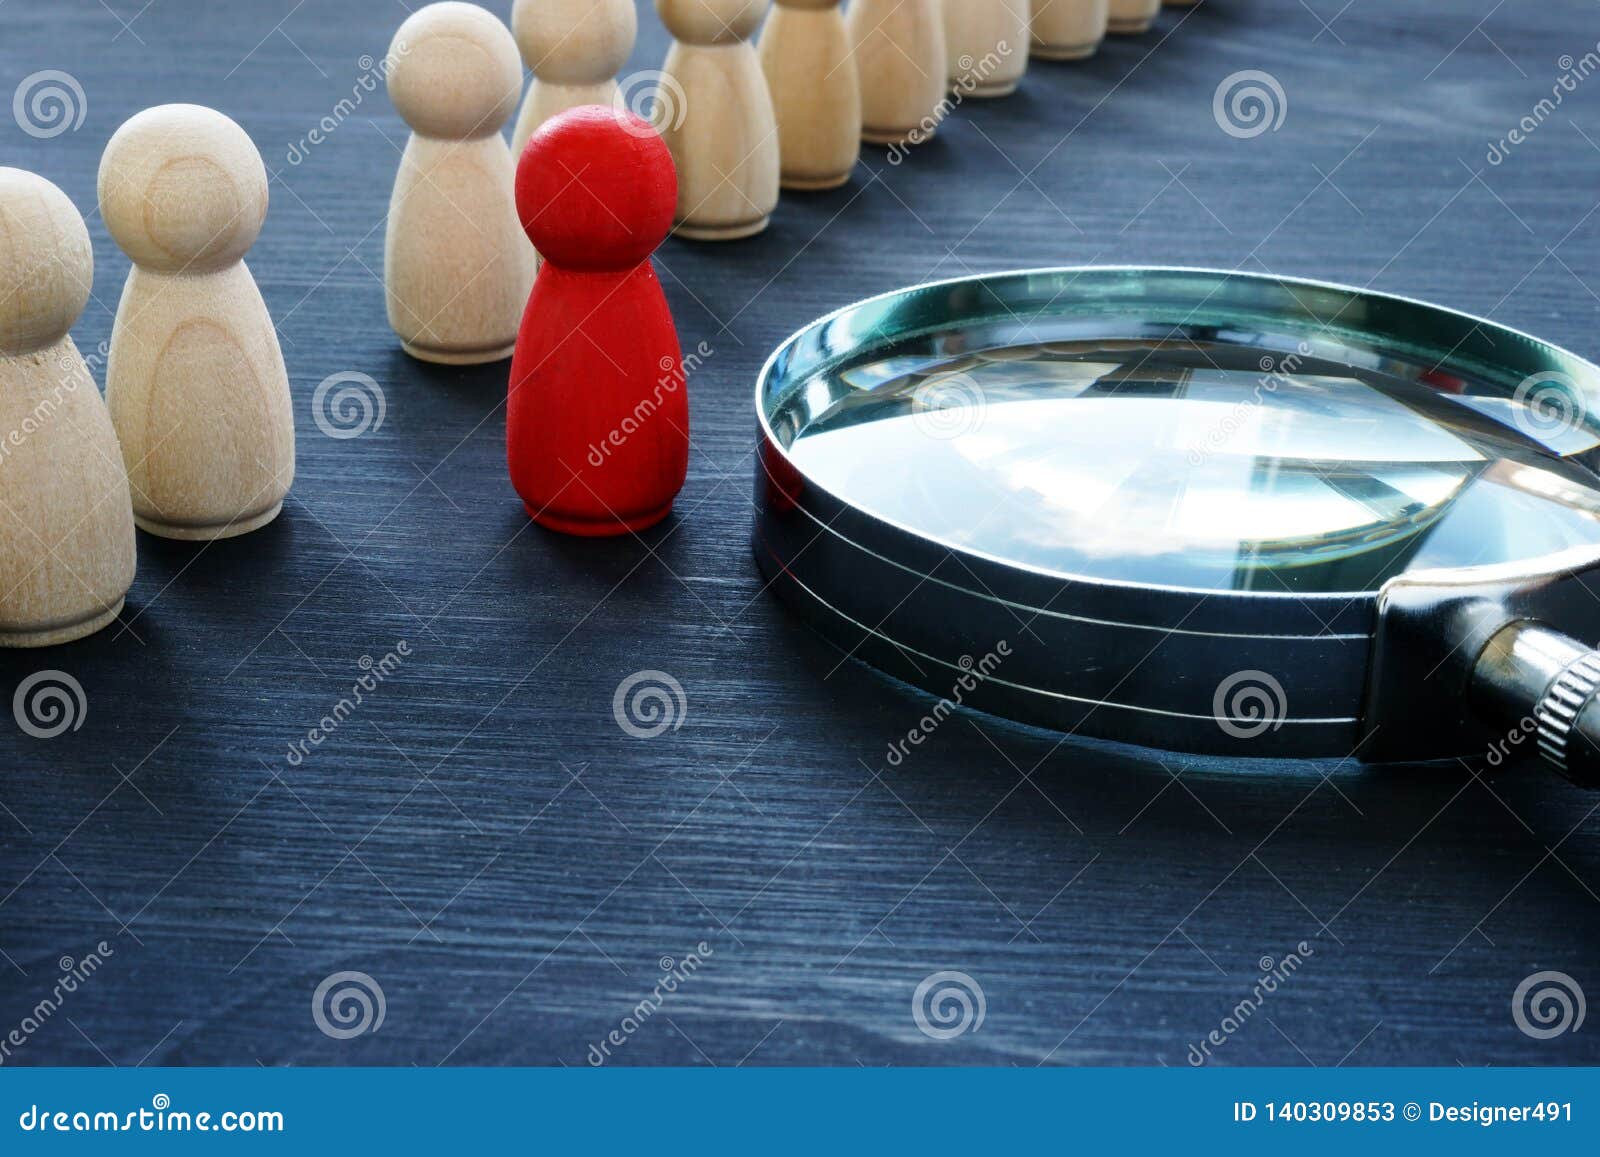 identify concept. recruitment and talent management. red figurine and magnifier